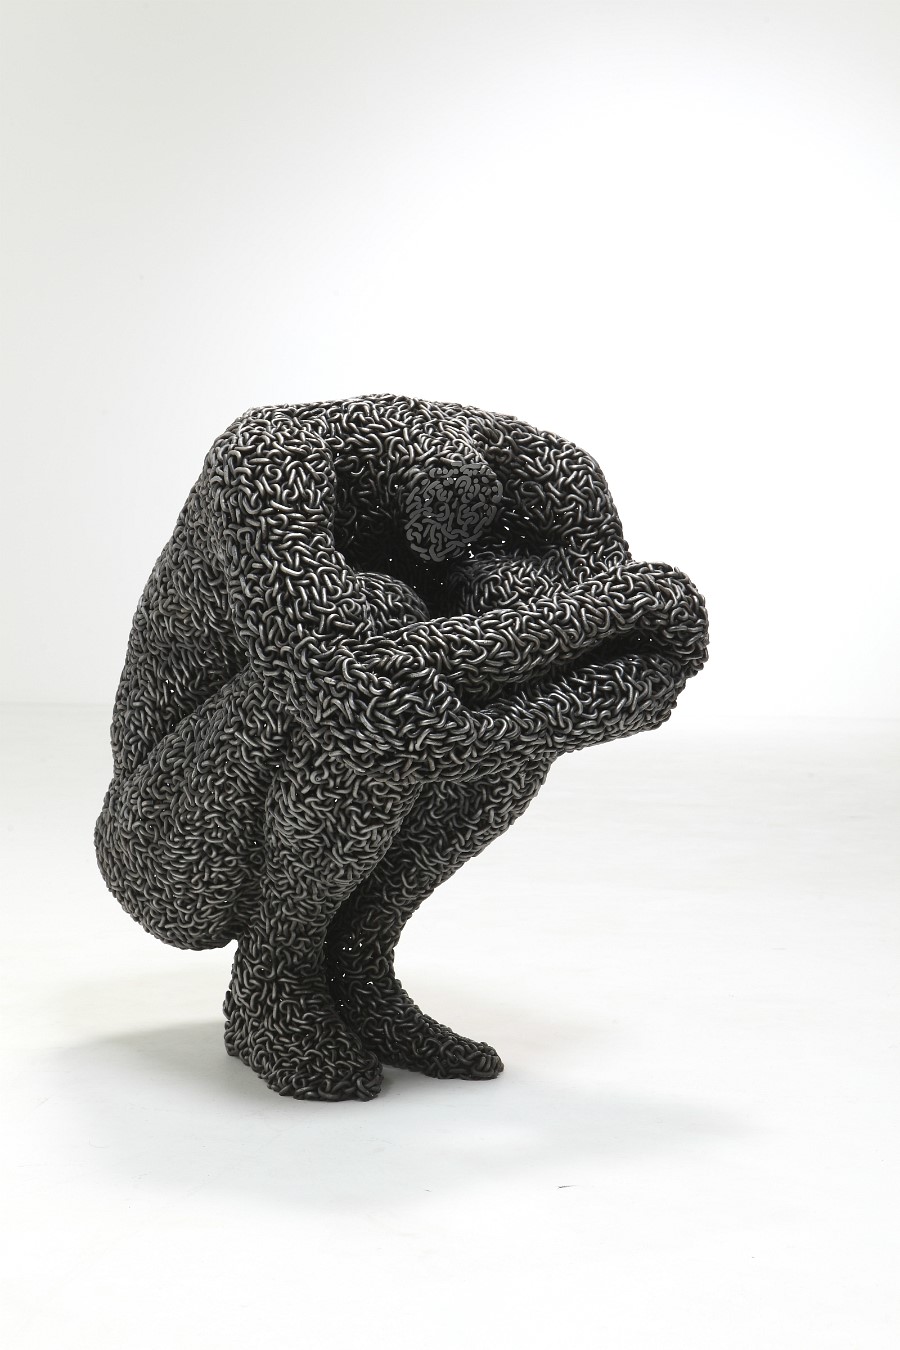 seo-young-deok-chain-sculptures-06